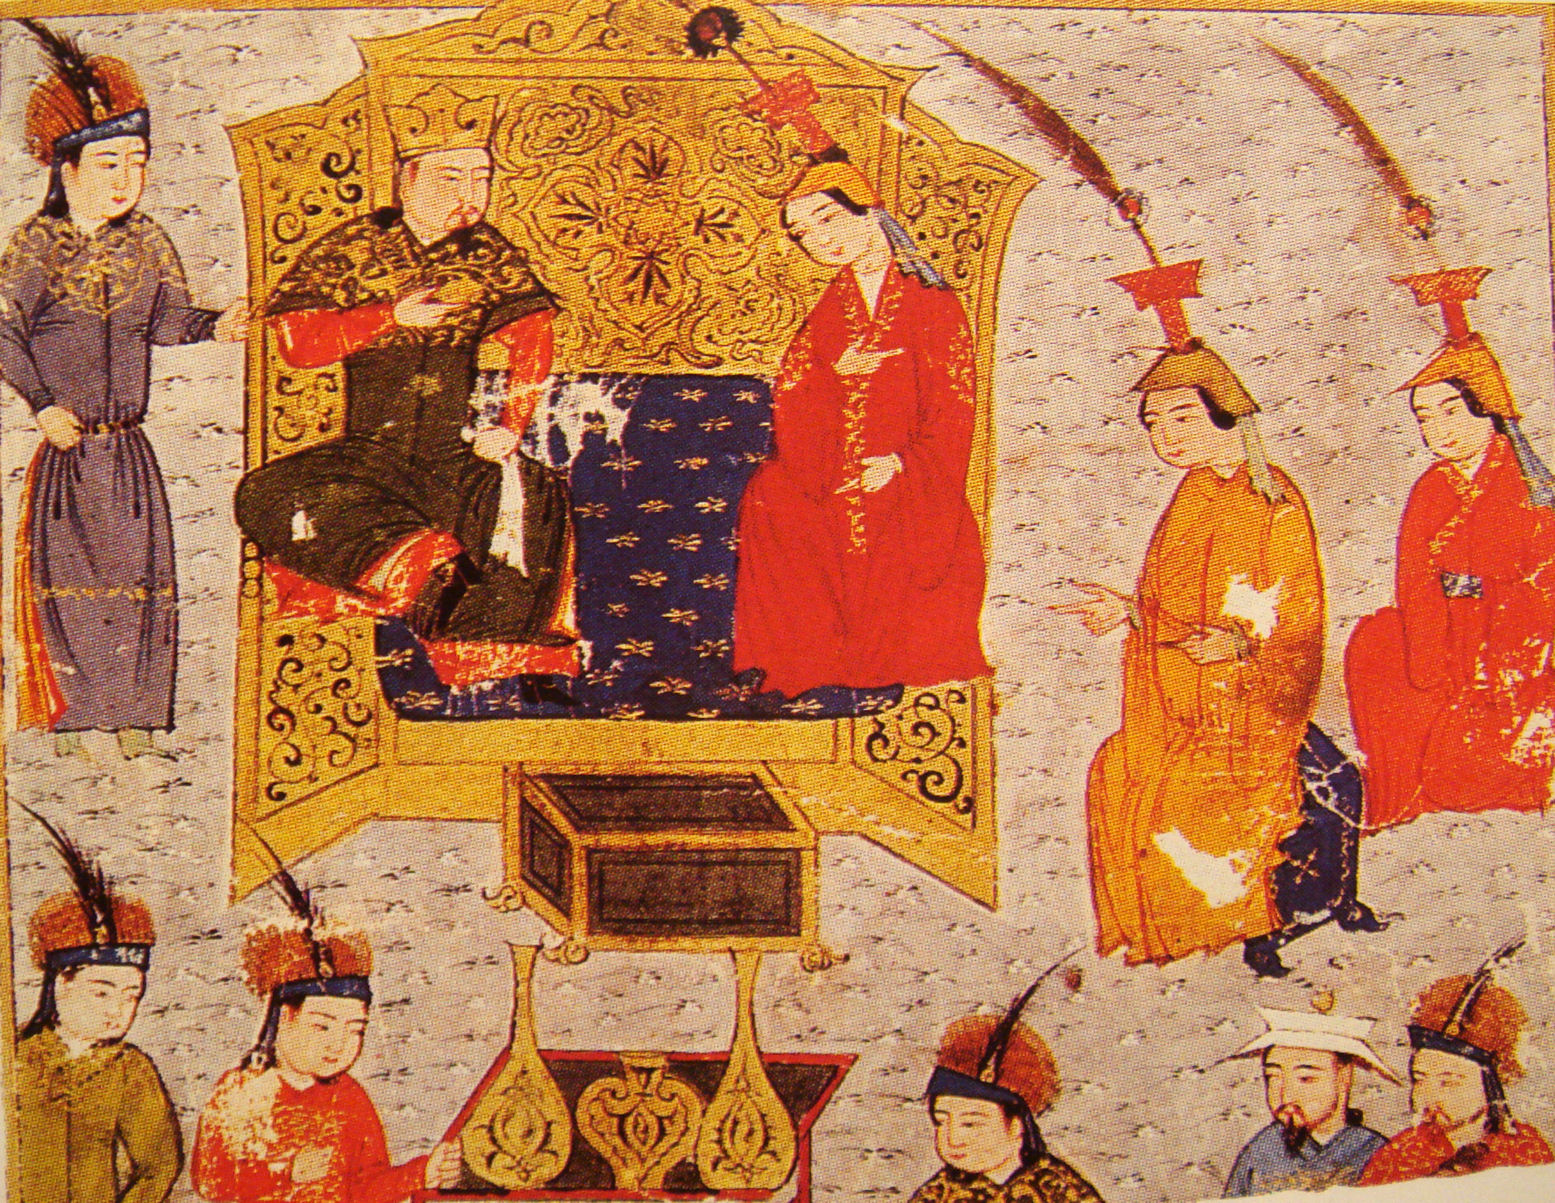 Painting shows king and queen surrounded by others at court